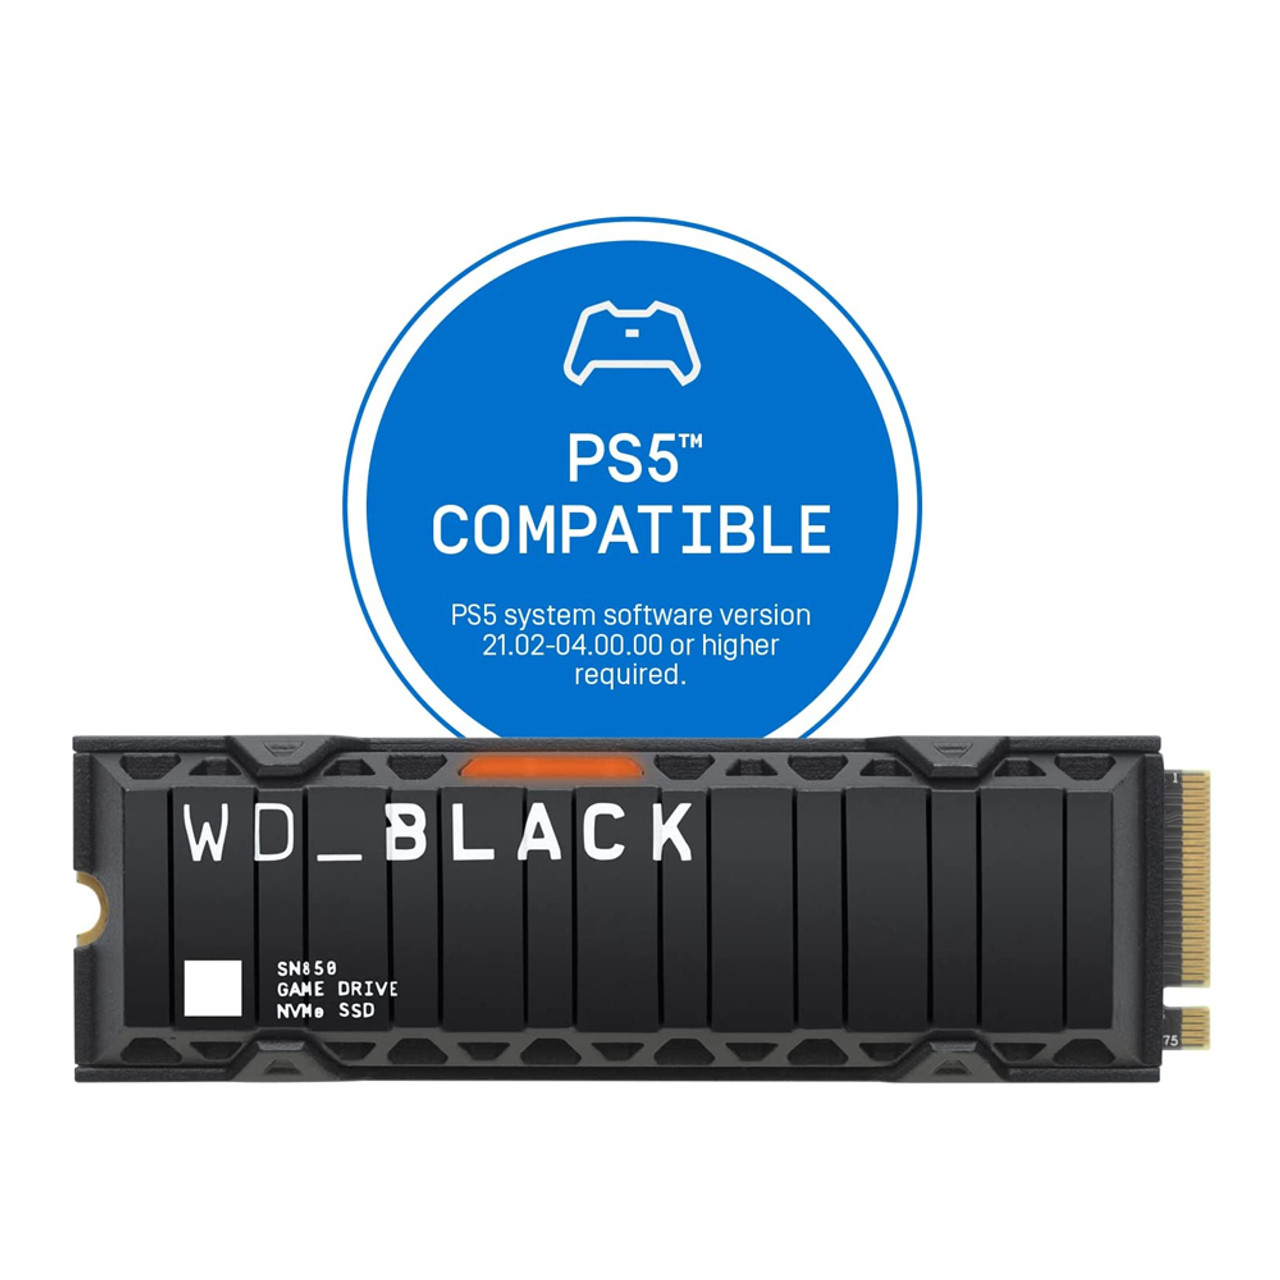 WD BLACK 1TB SN850 NVMe Internal Gaming SSD Solid State Drive with Heatsink ,Gen4 PCIe,M.2 WDS100T1XHE 